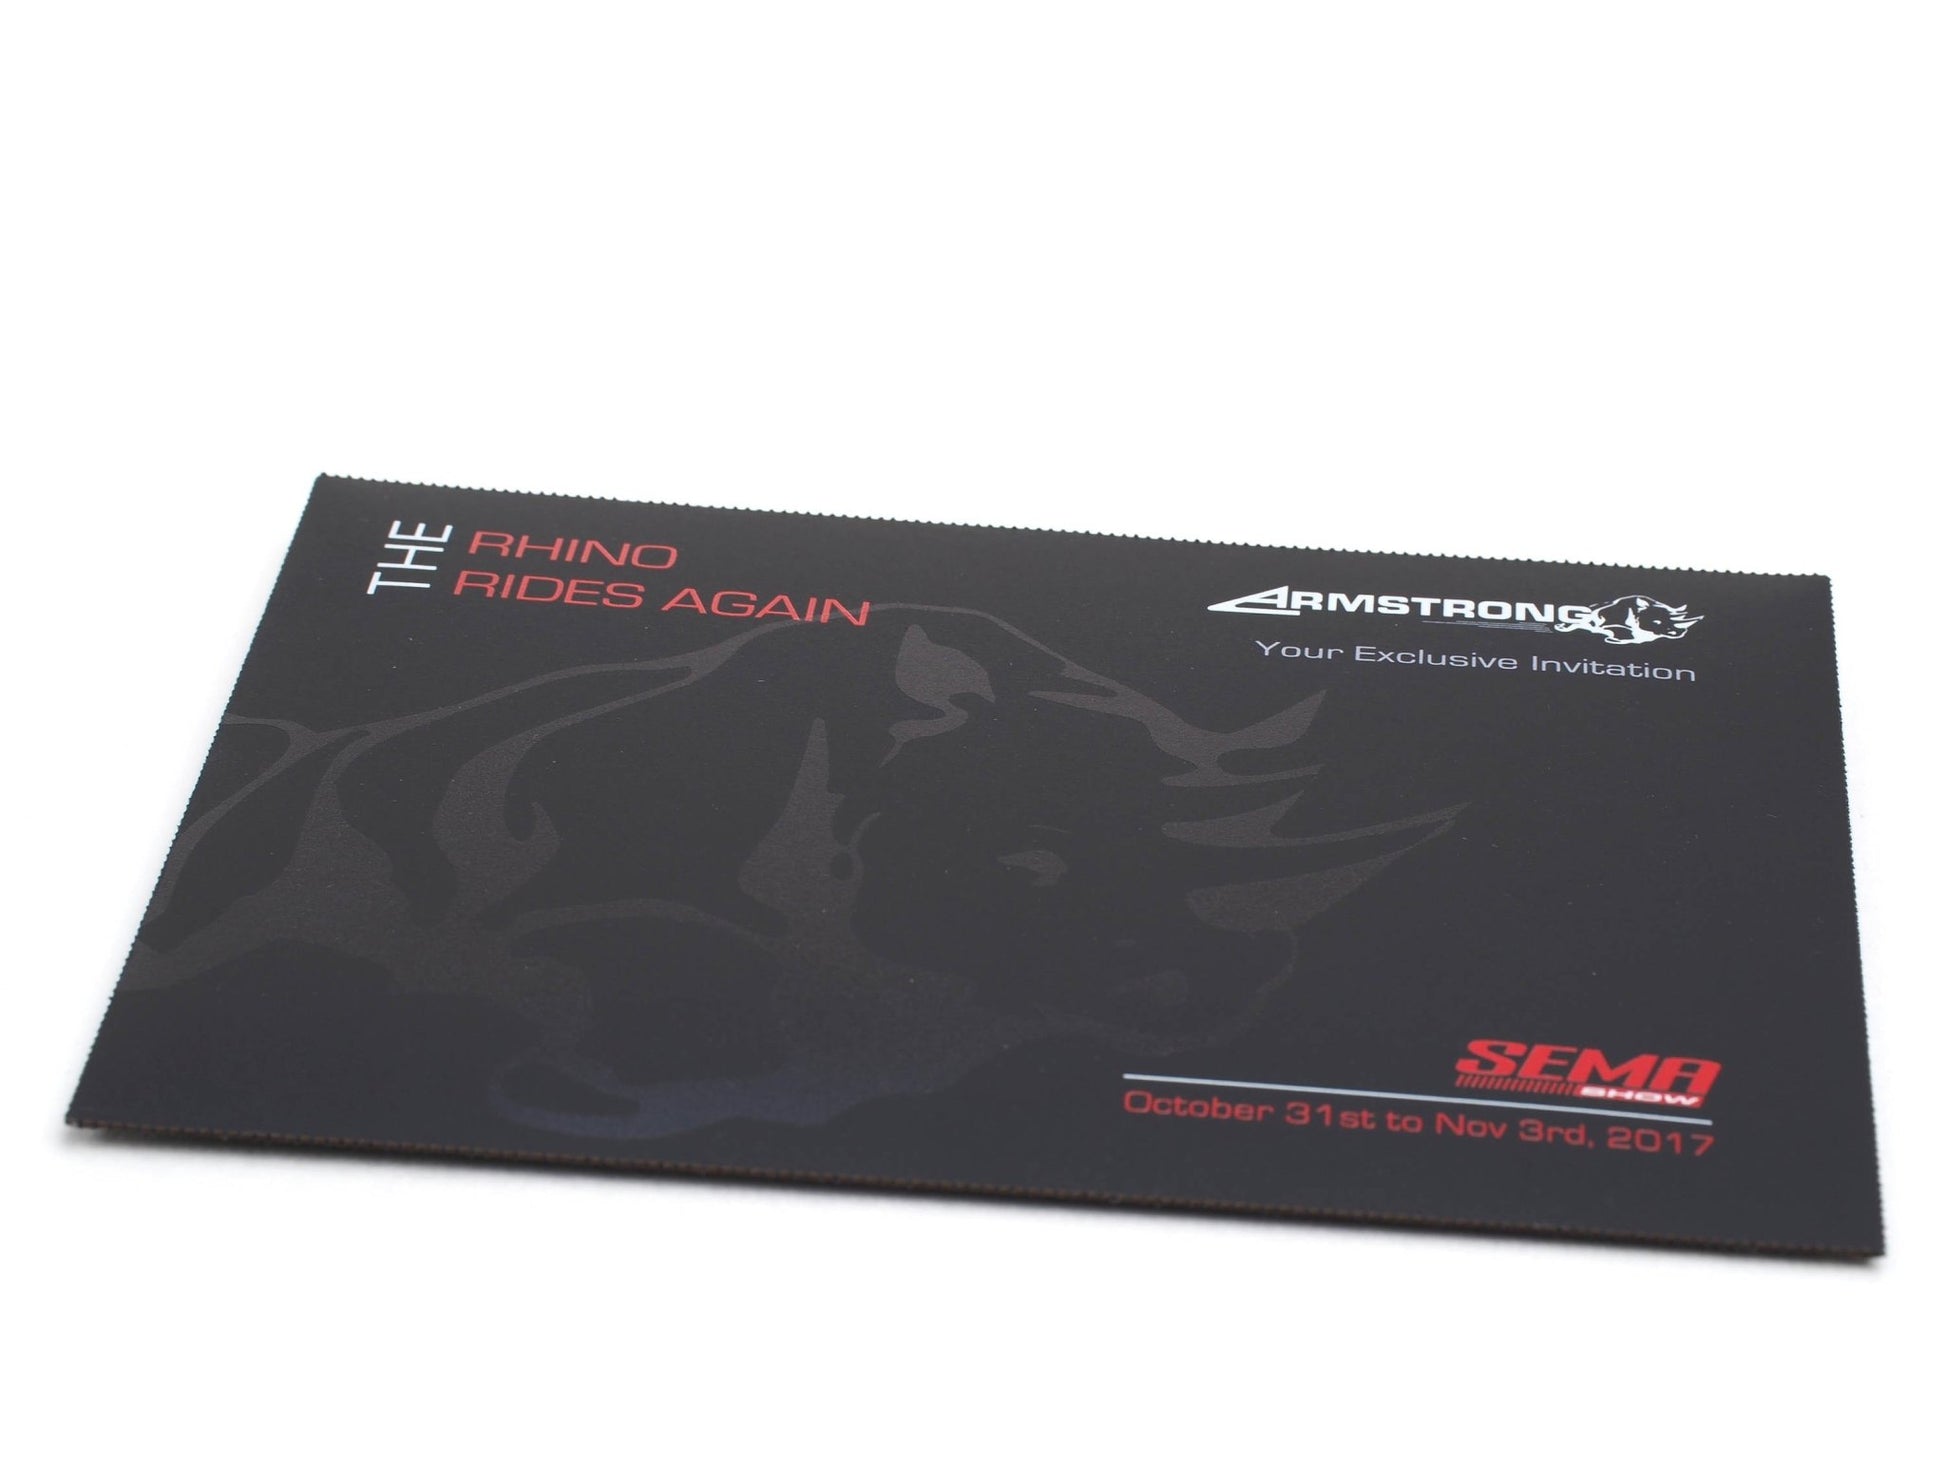 The invitation event company with envelop and info cards - ColibriGift